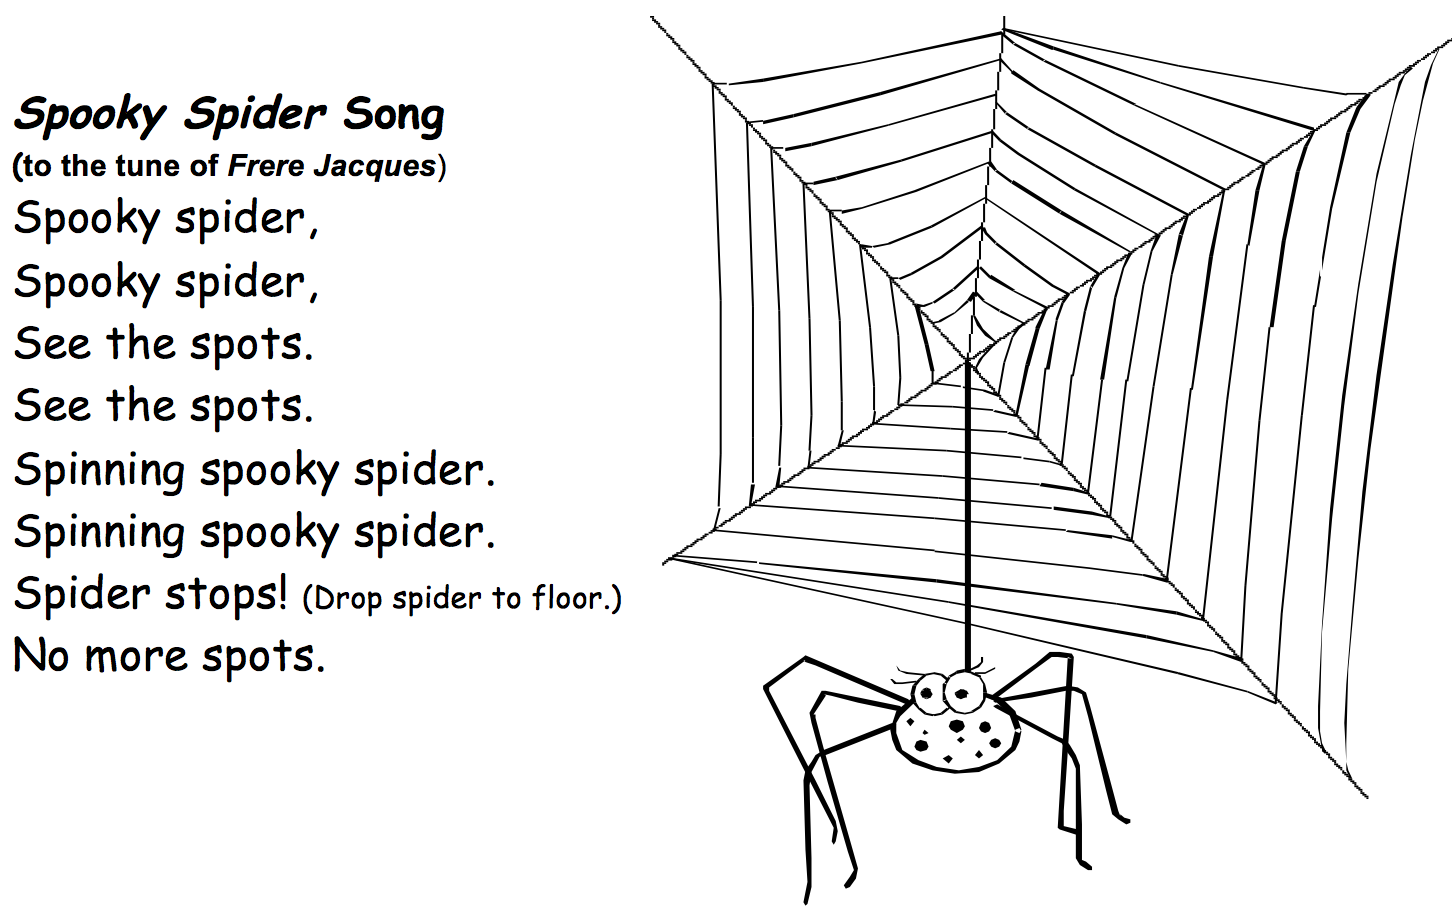 spooky-spider-song-and-graphic